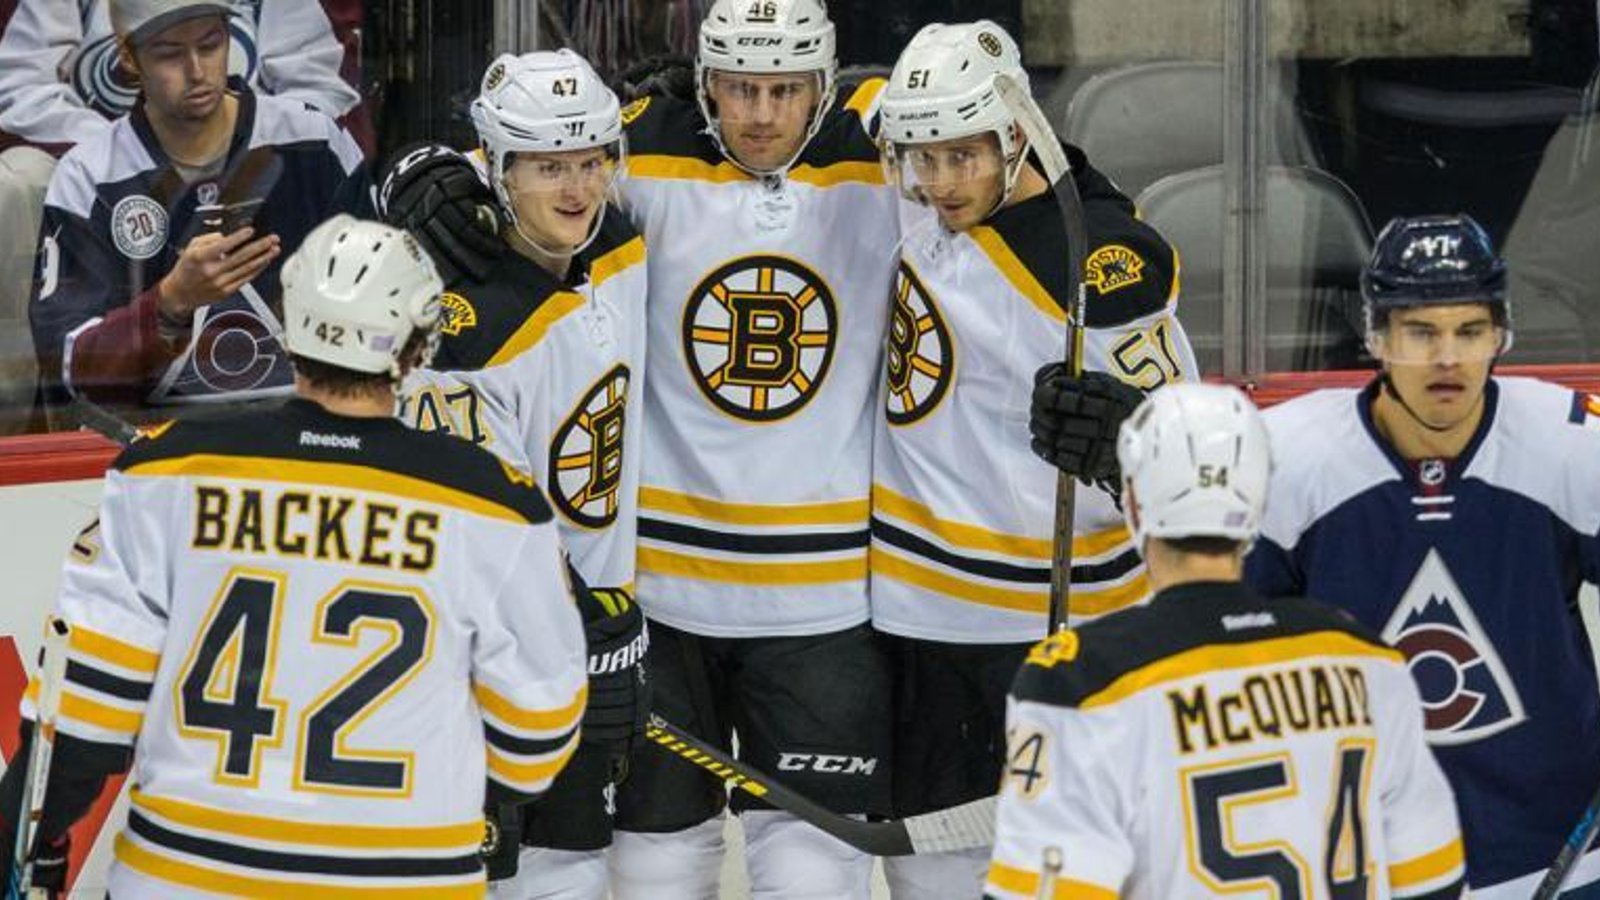 Bruins announce roster cuts